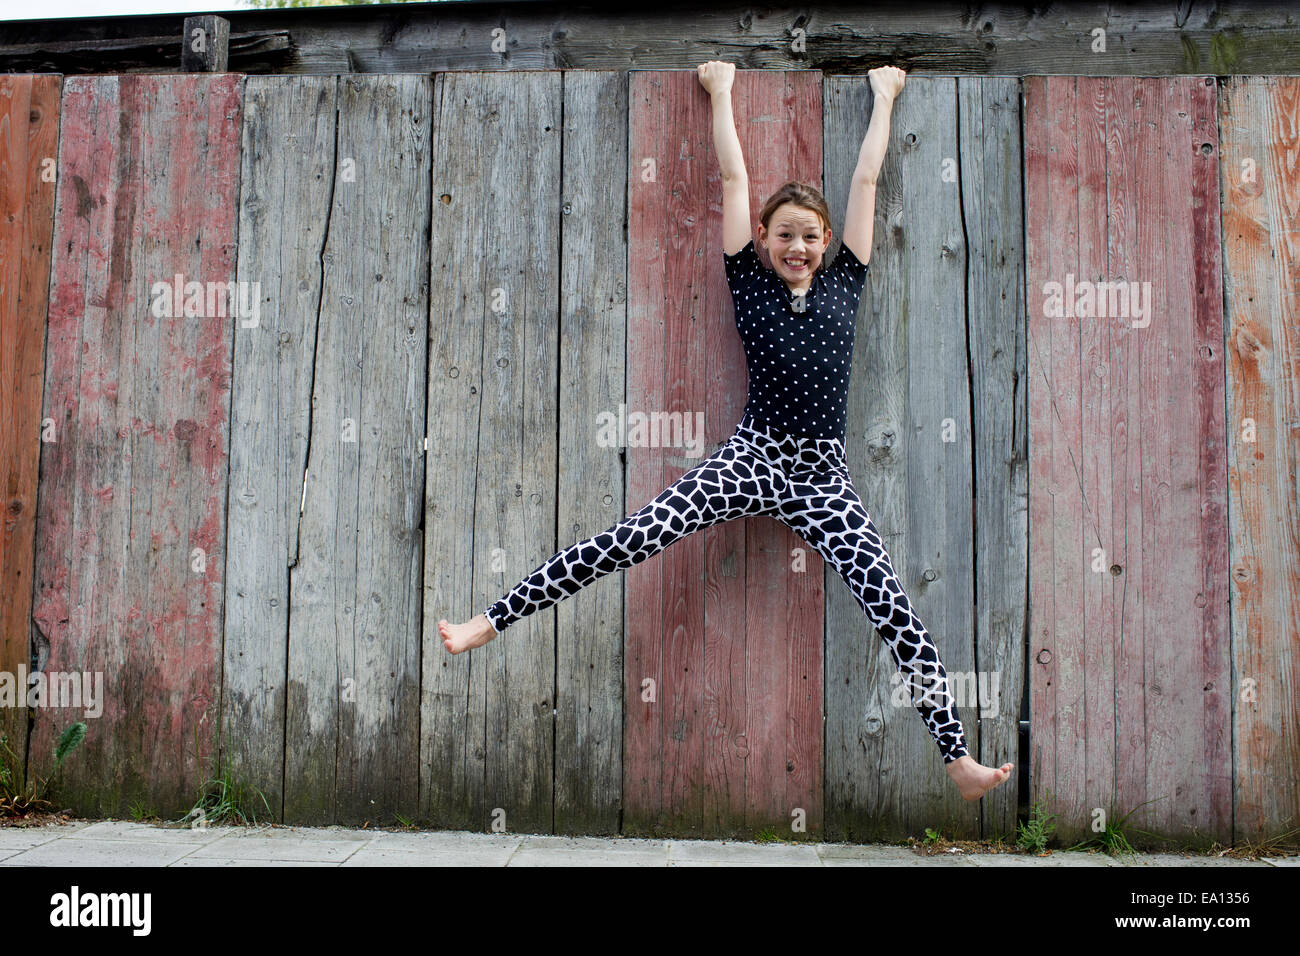 Teenage girl hanging from wooden fence Stock Photo